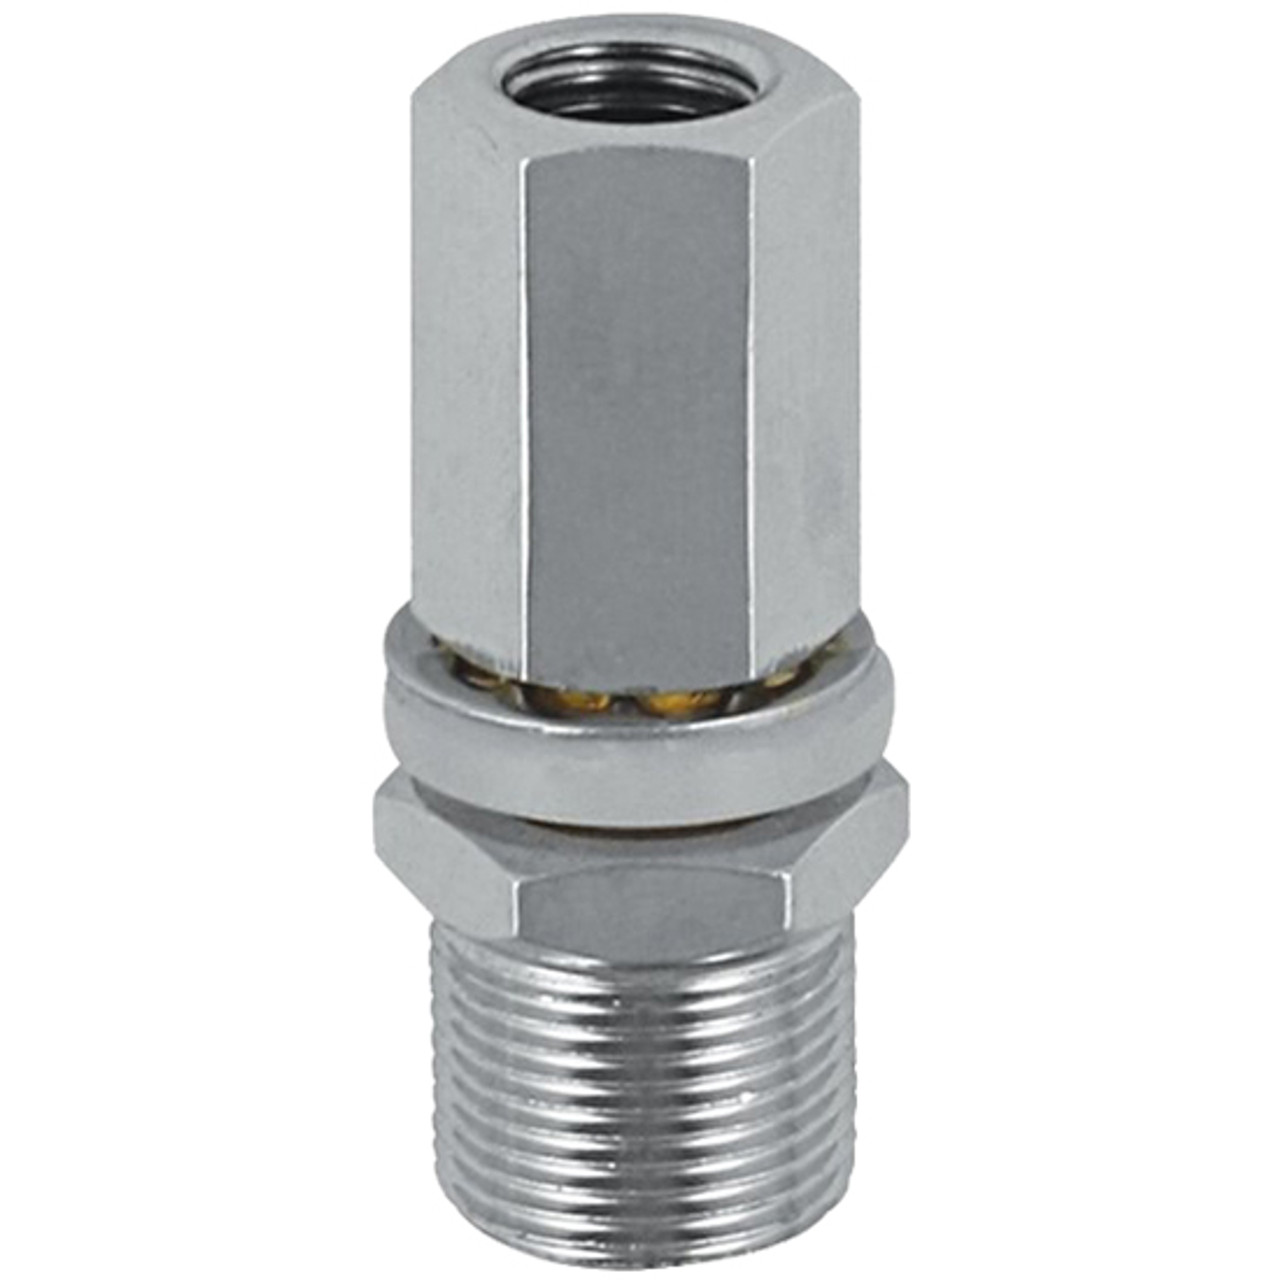 Heavy Duty CB Antenna Stud Mount Adapter with SO-239 Connector for